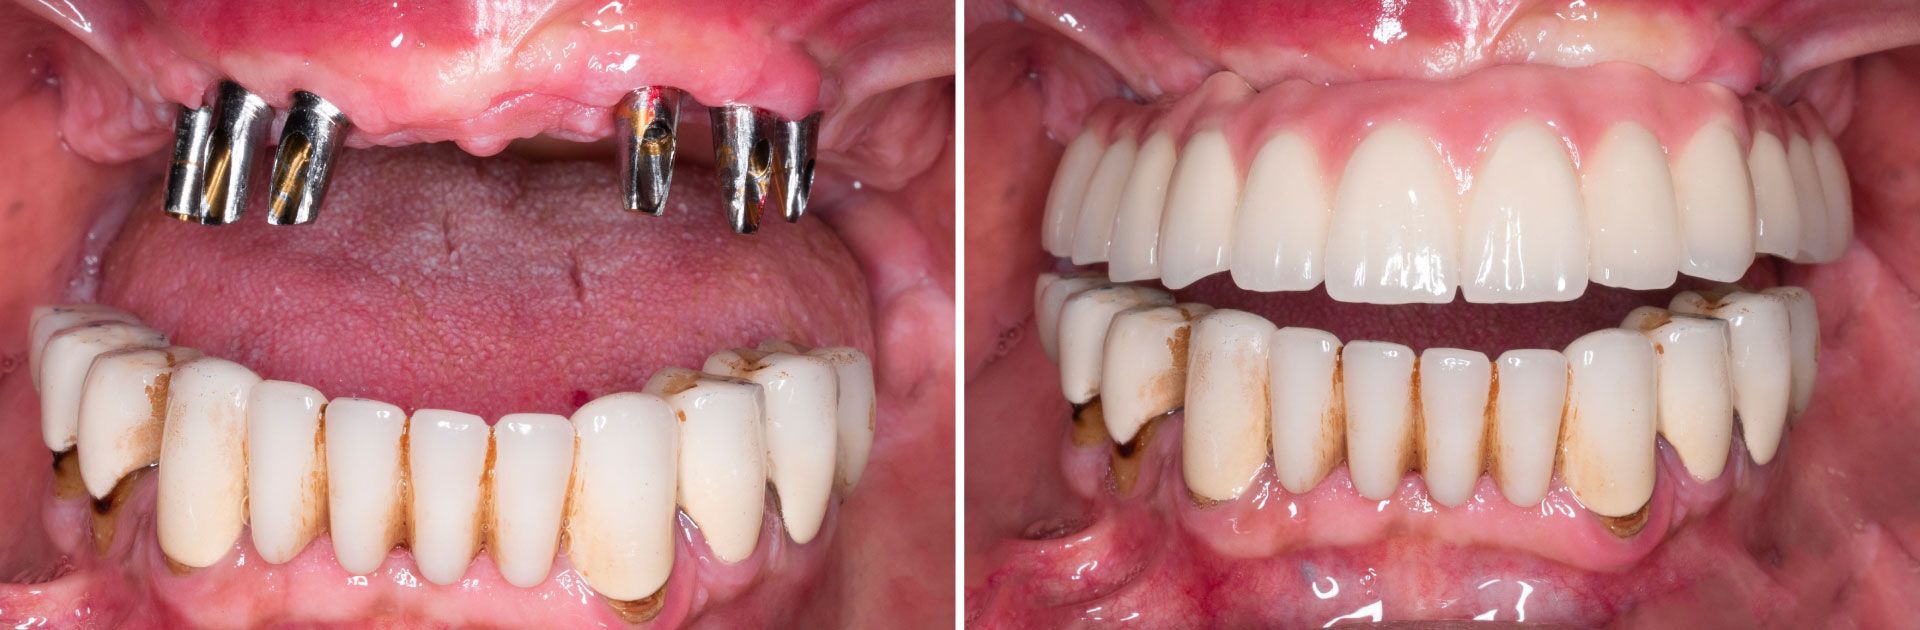 An image of a patient's teeth before and after dental implants